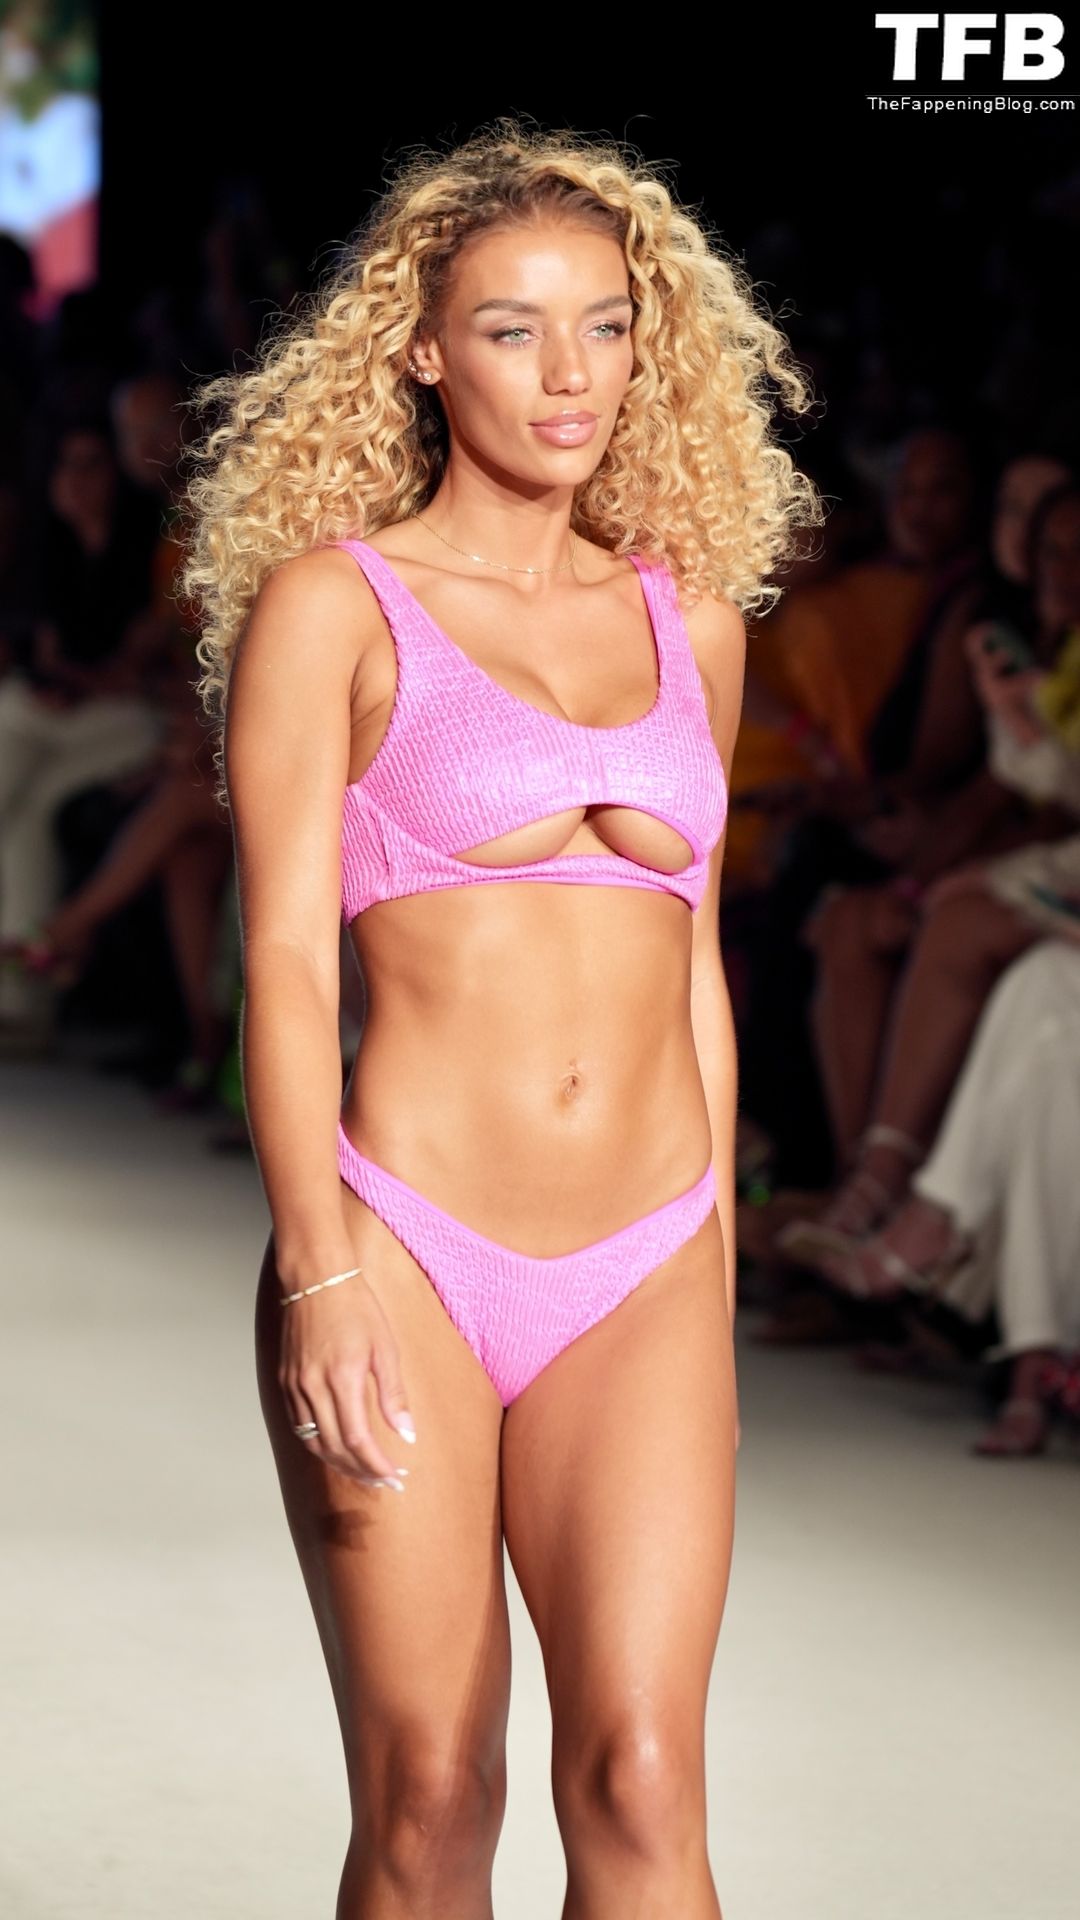 Jena-Frumes-Sexy-The-Fappening-Blog-4-1.jpg